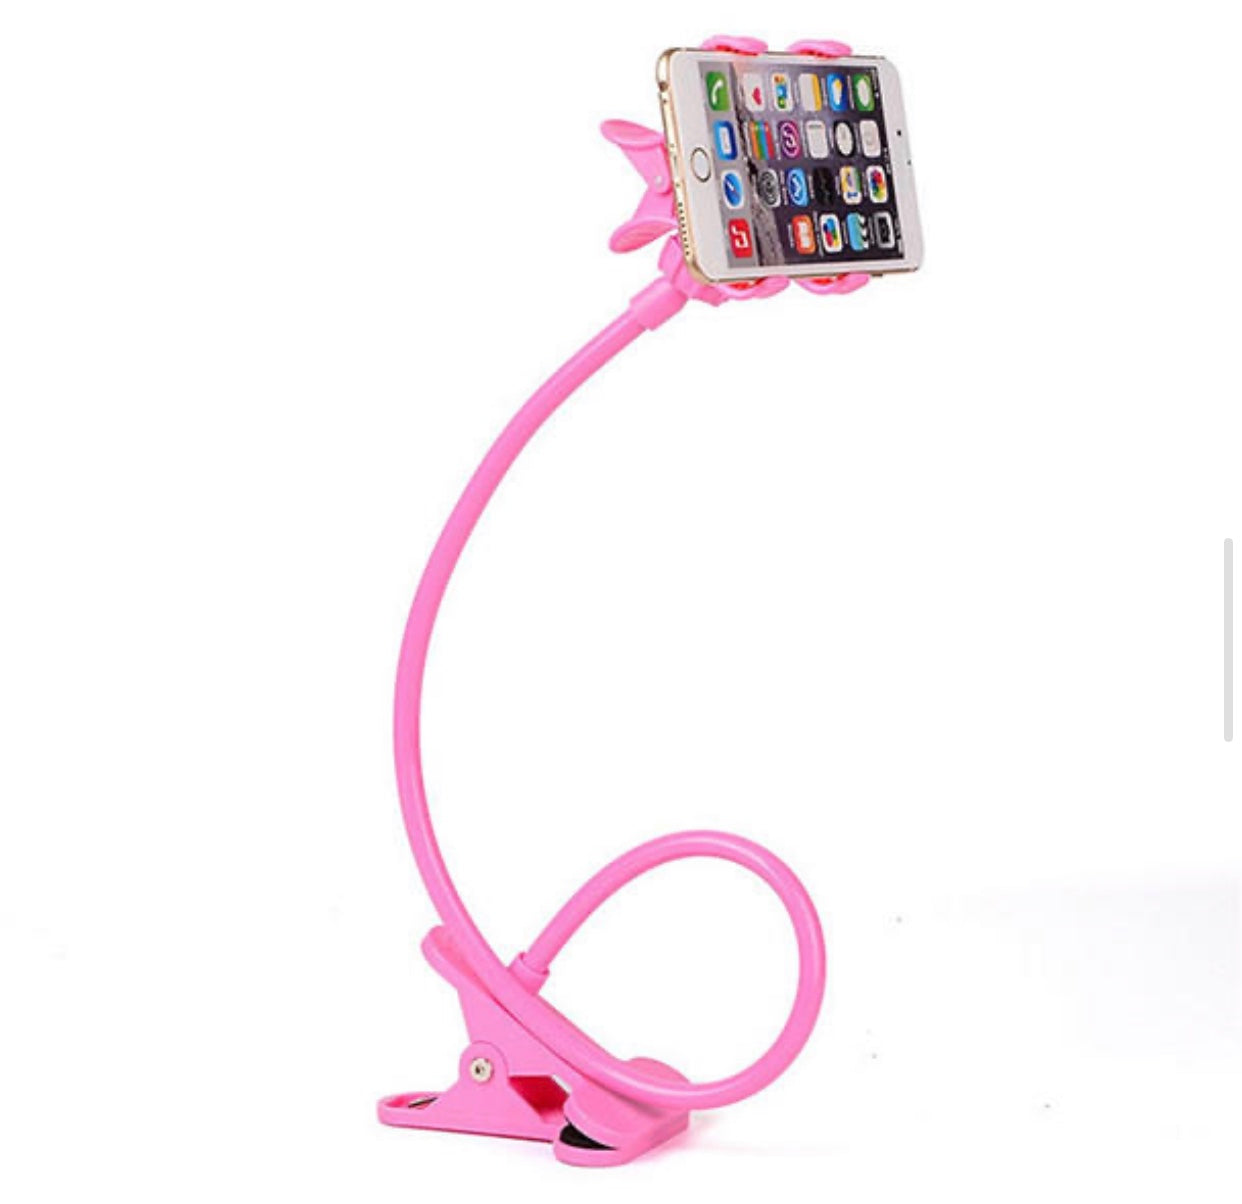 Phone Holder Adjustable Gooseneck 360 Degrees Rotation Flexible to adjust the position at an ideal distance and comfortable angle for easy viewing. Rose Pink. Pink.